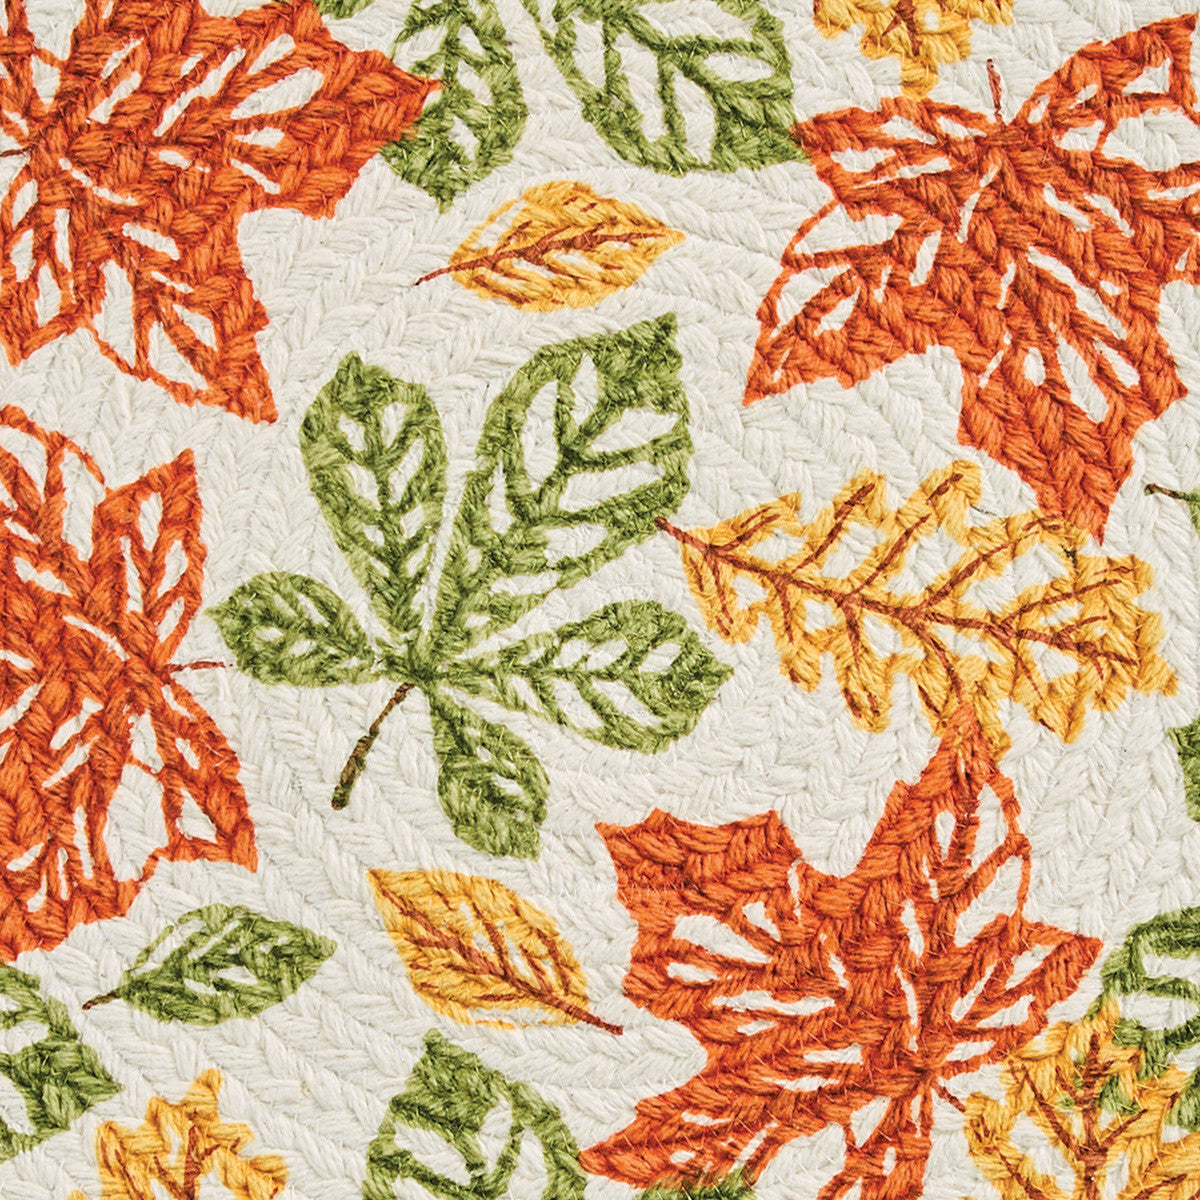 Park Designs Fall Leaves Printed Braided Placemat 15 Dia (Set of 4)